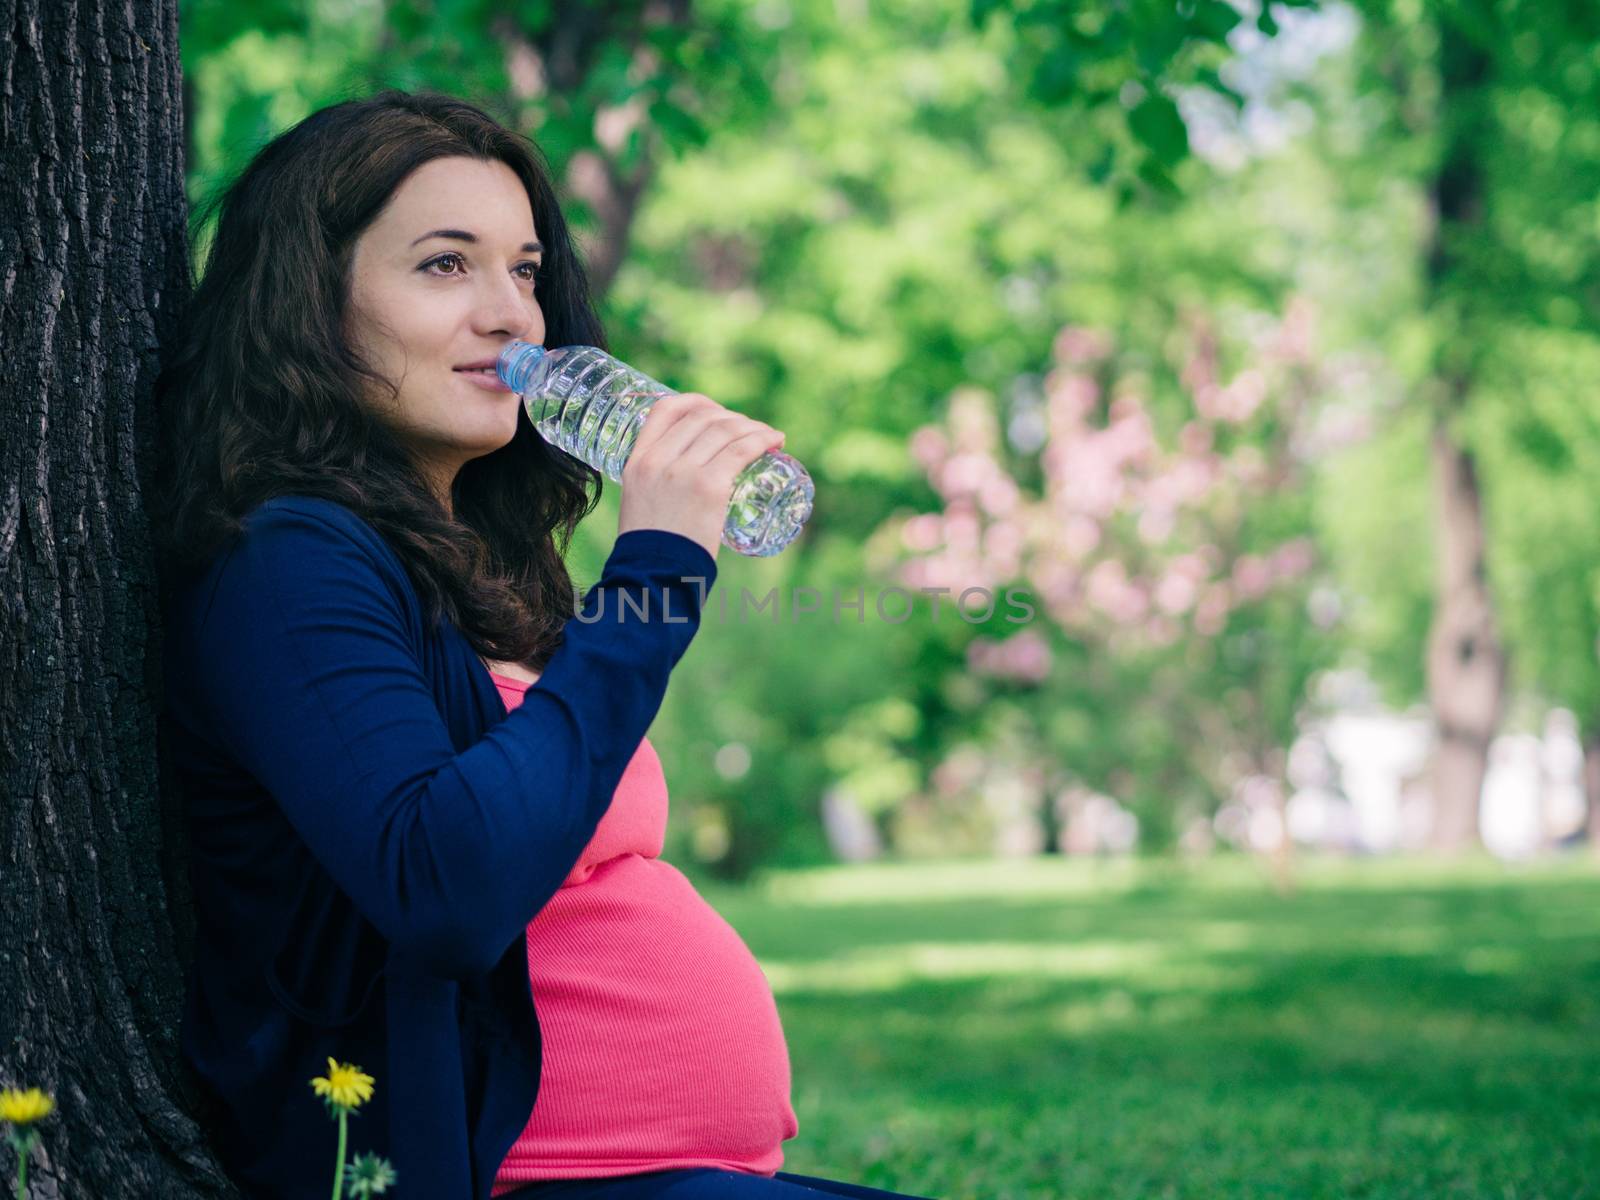 Pregnant woman drinks water from bottle outdoors. Copy space.